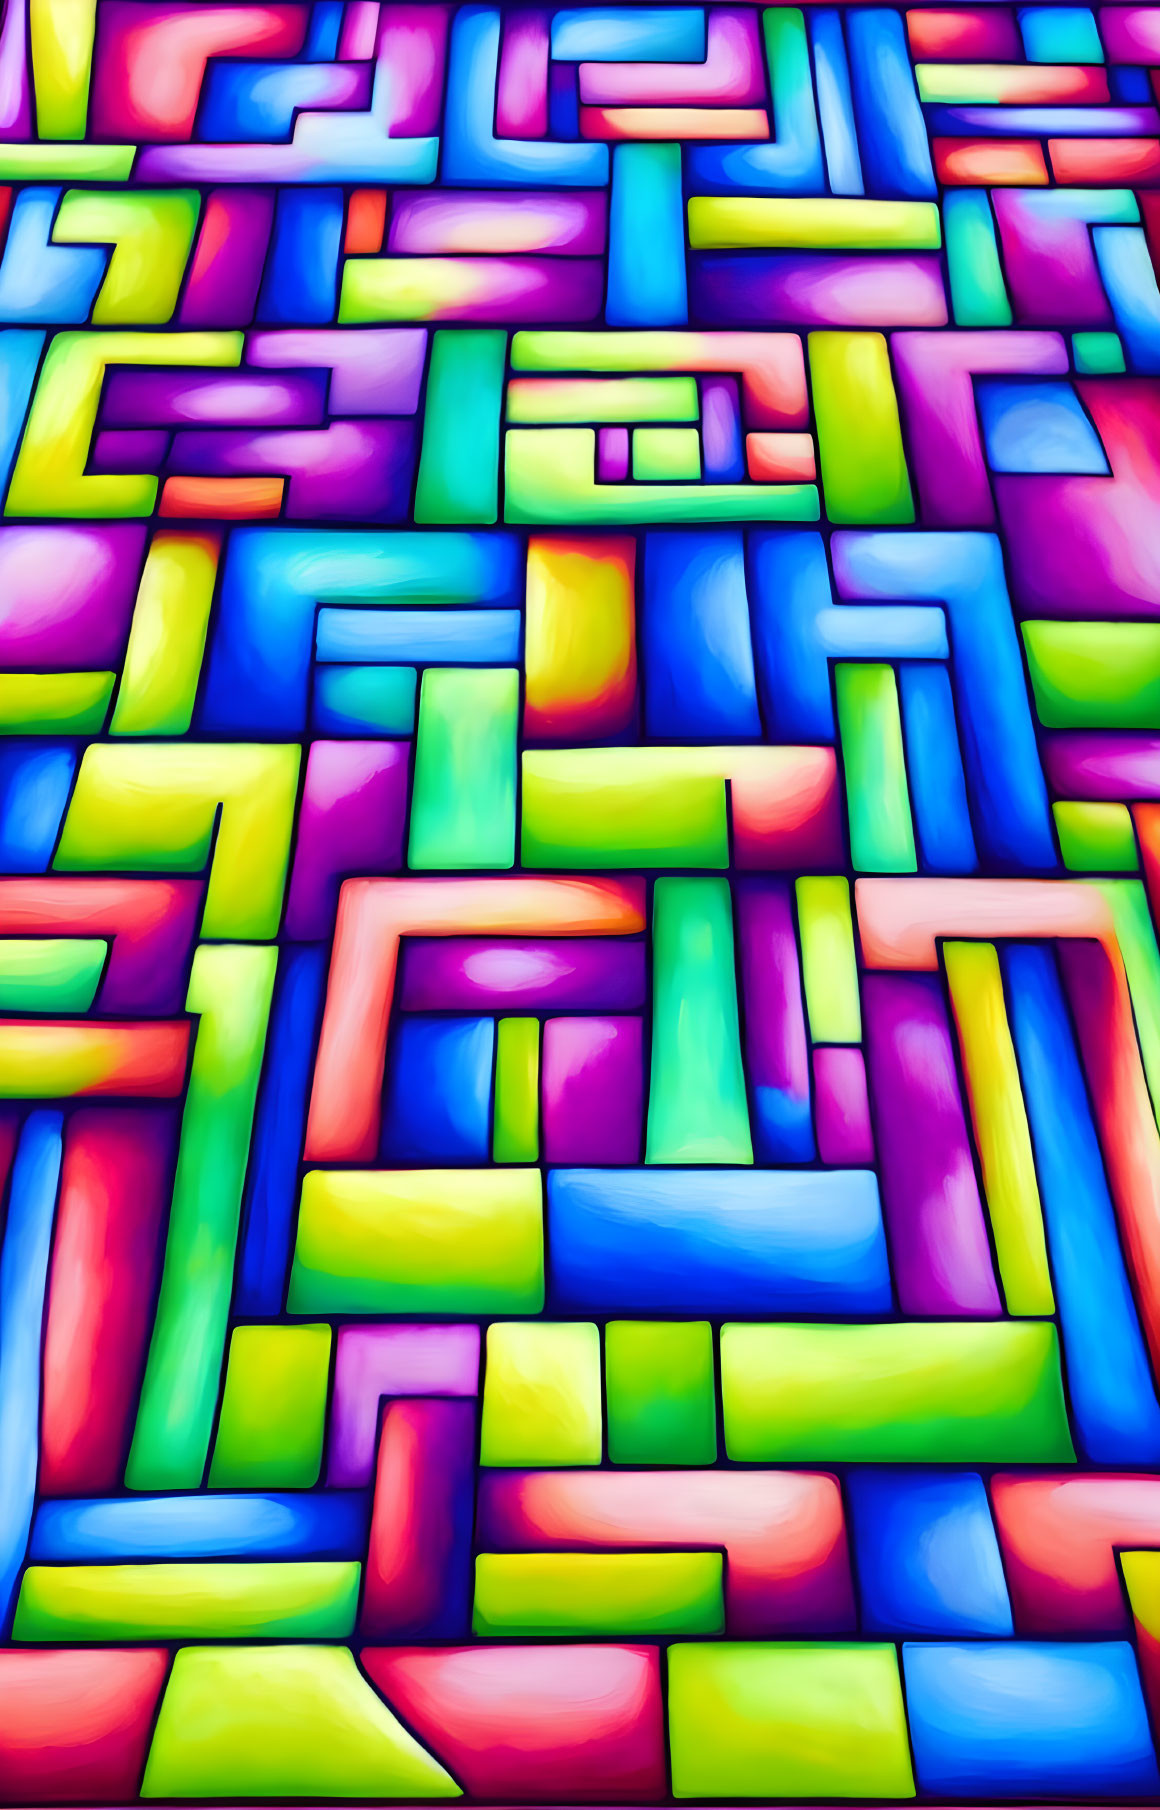 Colorful Glowing Abstract Digital Art: Neon Maze or Stained Glass